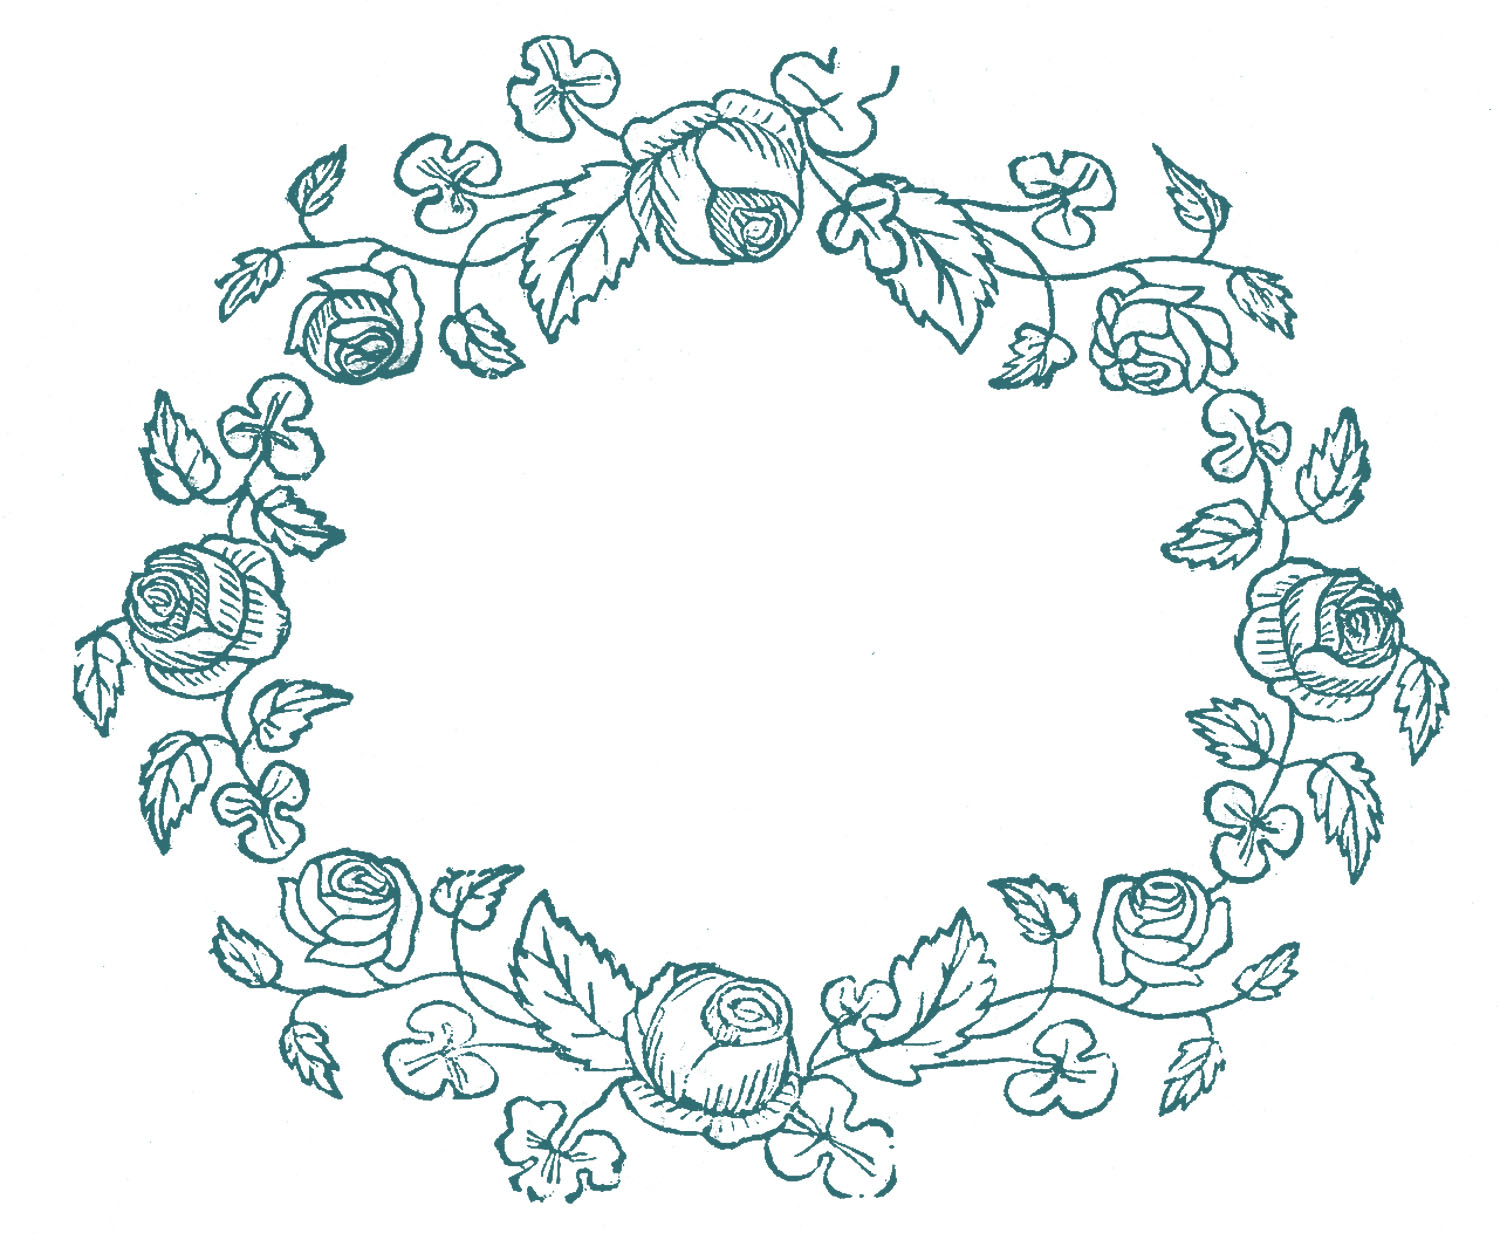 Rose Patterns For Embroidery Royalty Free Images Rose Wreaths Embroidery Pattern The